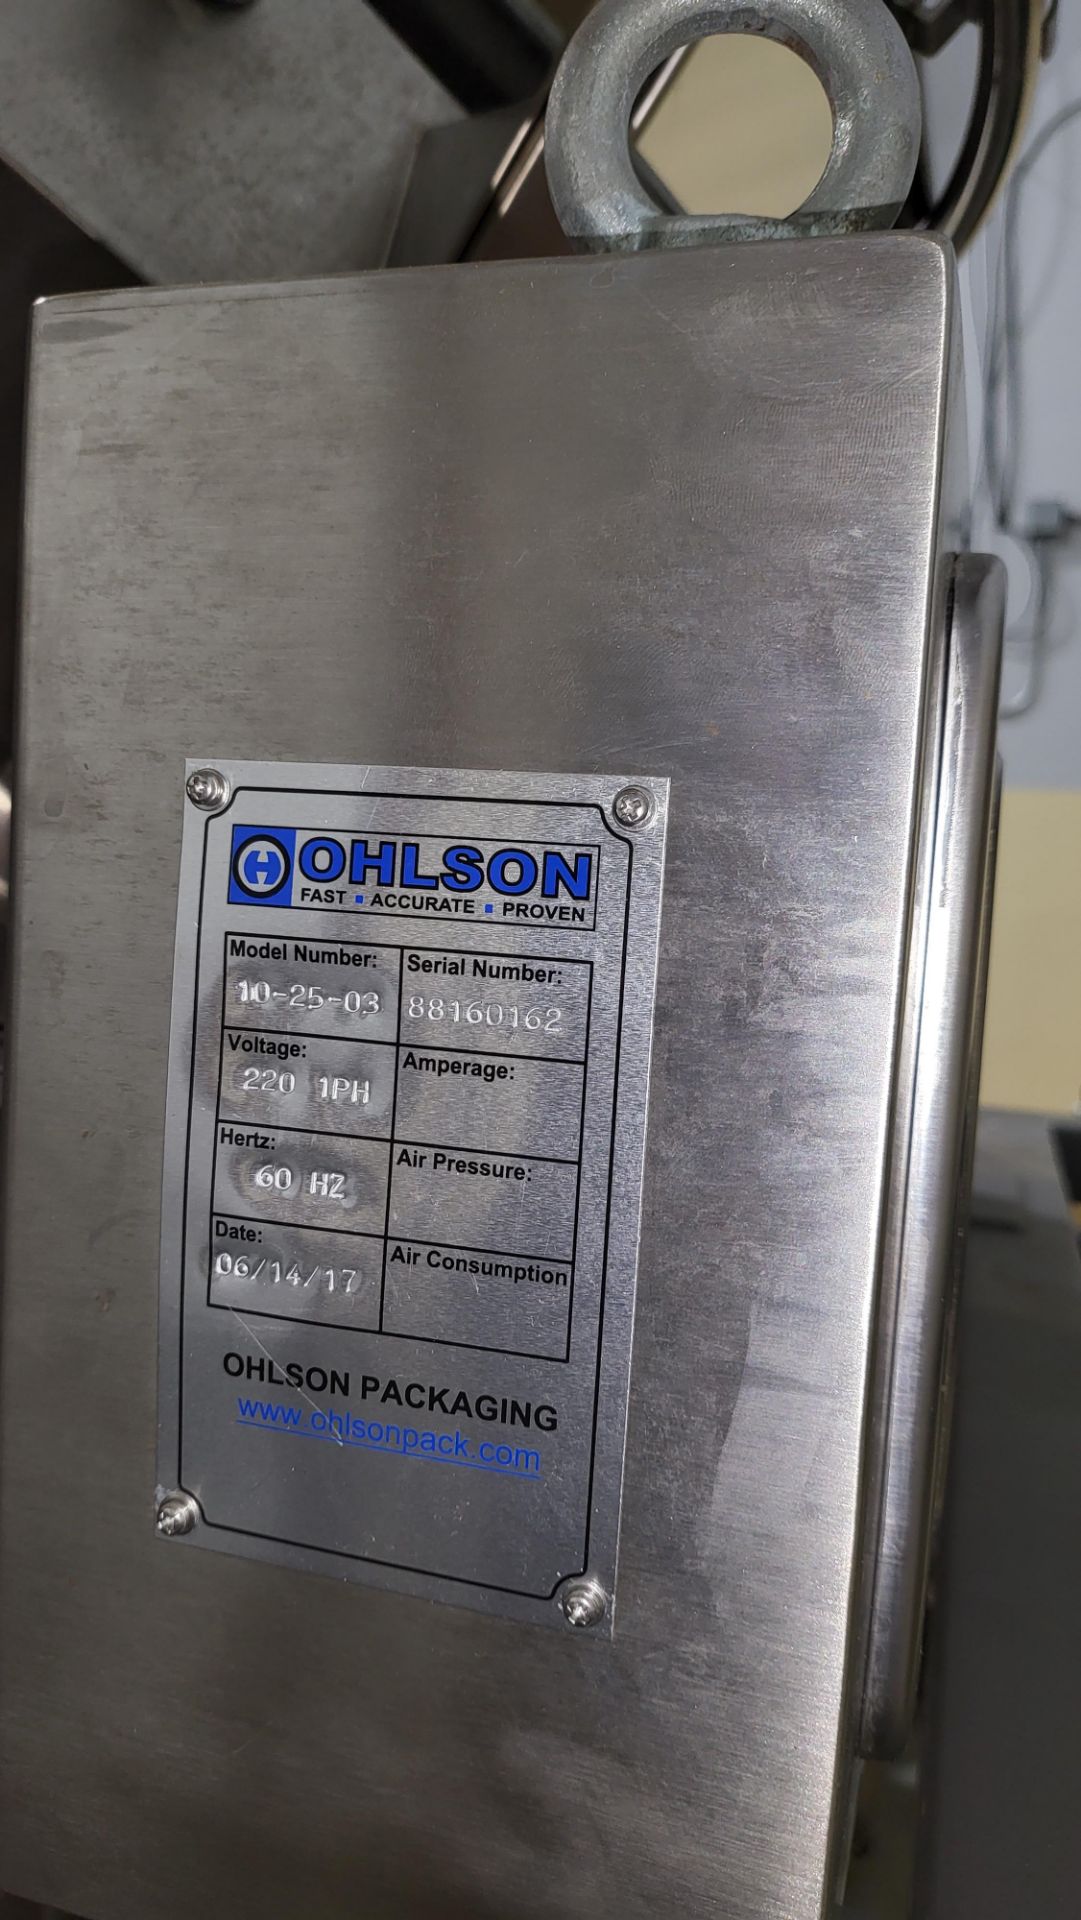 Ohlson Food and packaging system (Chocolate production) - Image 7 of 7